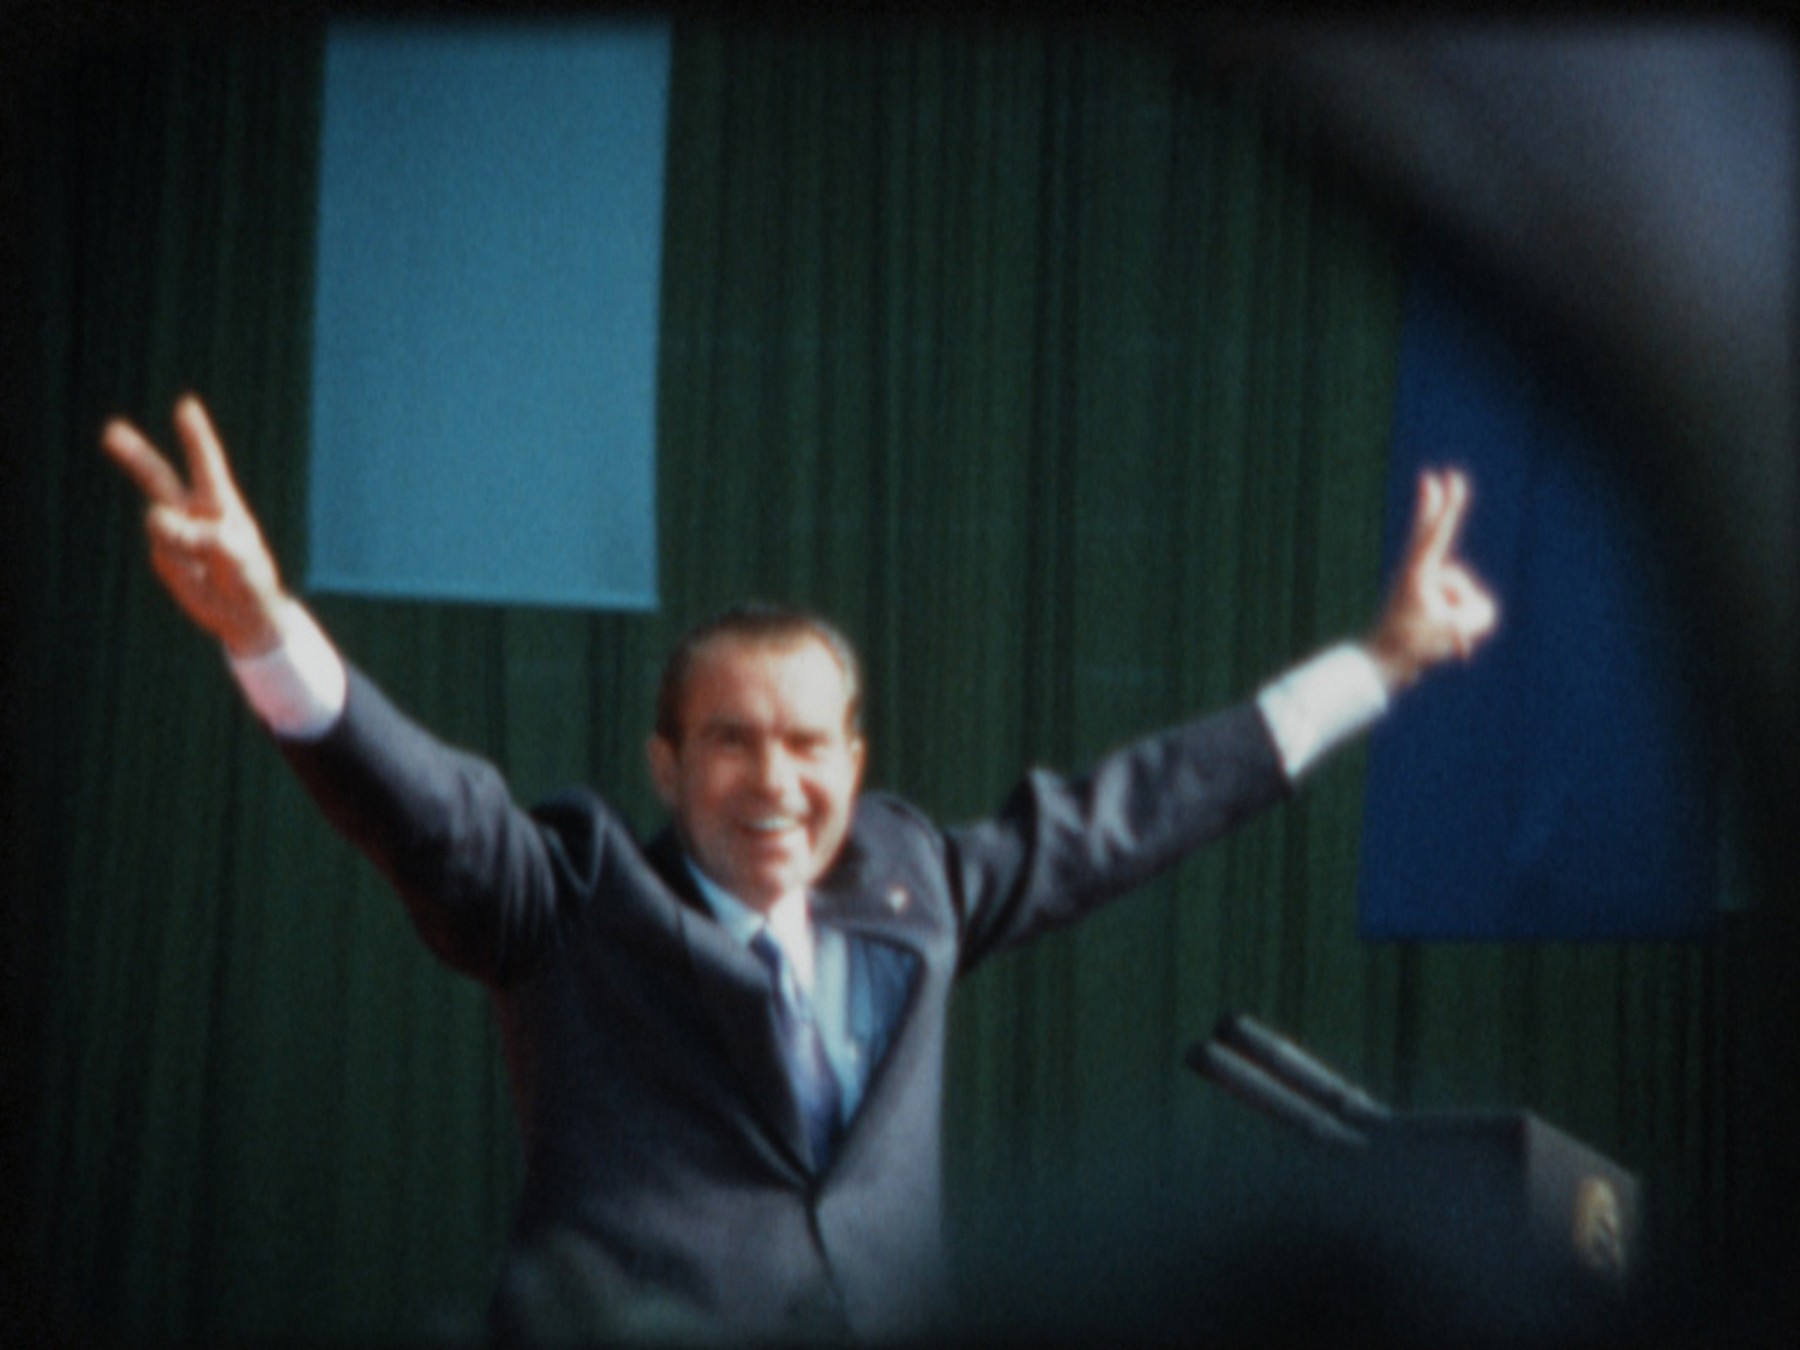 President Nixon at a large 1972 rally, a few days before his historic landslide reelection